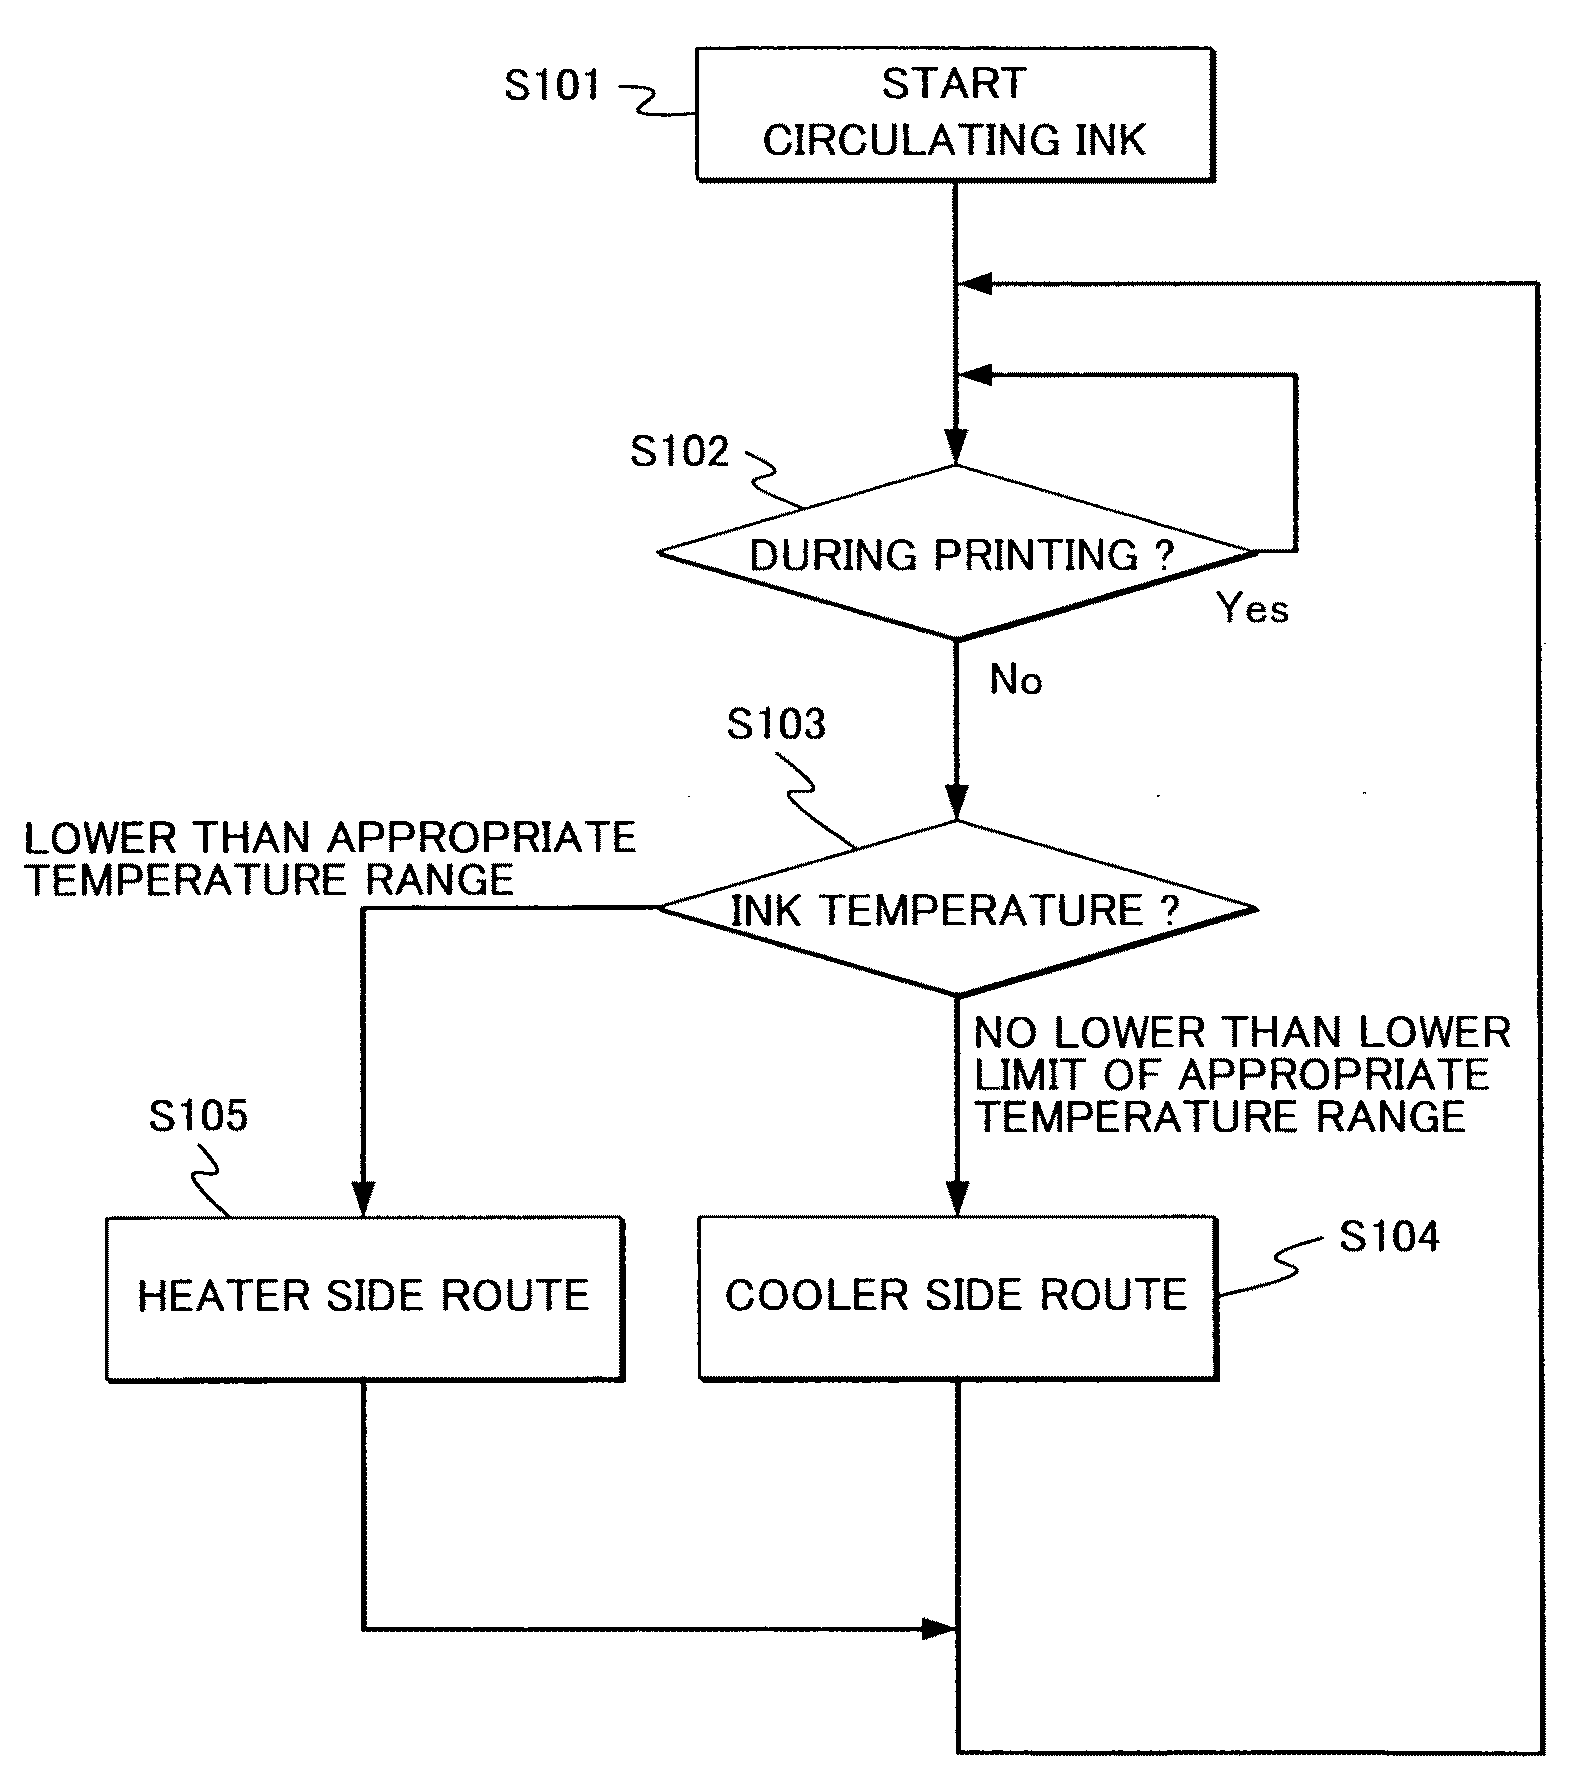 Printing apparatus capable of effectively heating and cooling ink